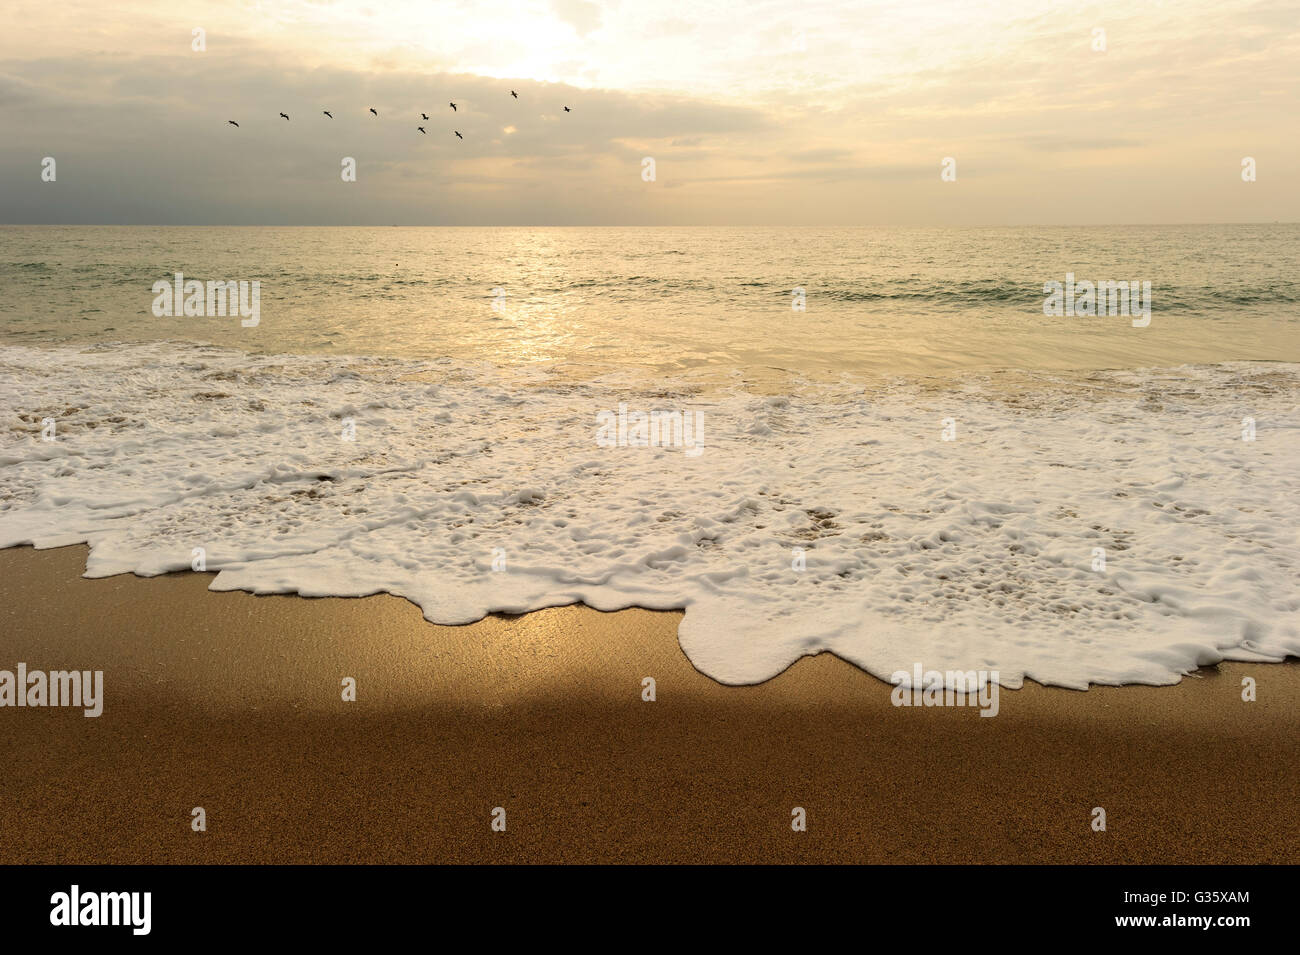 Beach sunset is a flock of birds flying in the ocean sky as a gentle wave rolls to the shore. Stock Photo